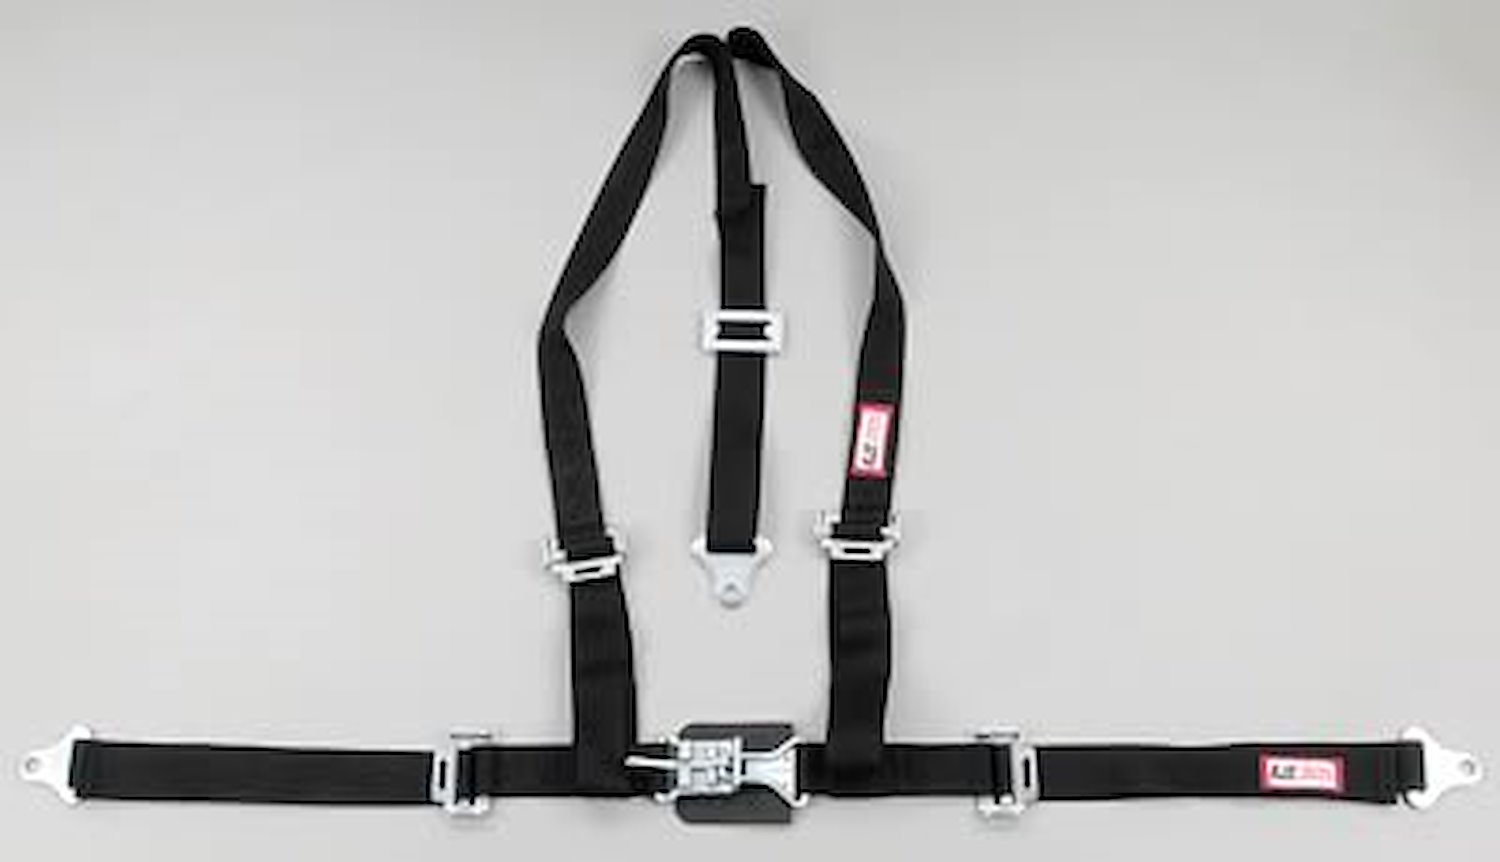 NON-SFI L&L HARNESS 3 PULL UP Lap Belt SEWN IN 2 Shoulder Harness V ROLL BAR Mount ALL SNAP ENDS YELLOW